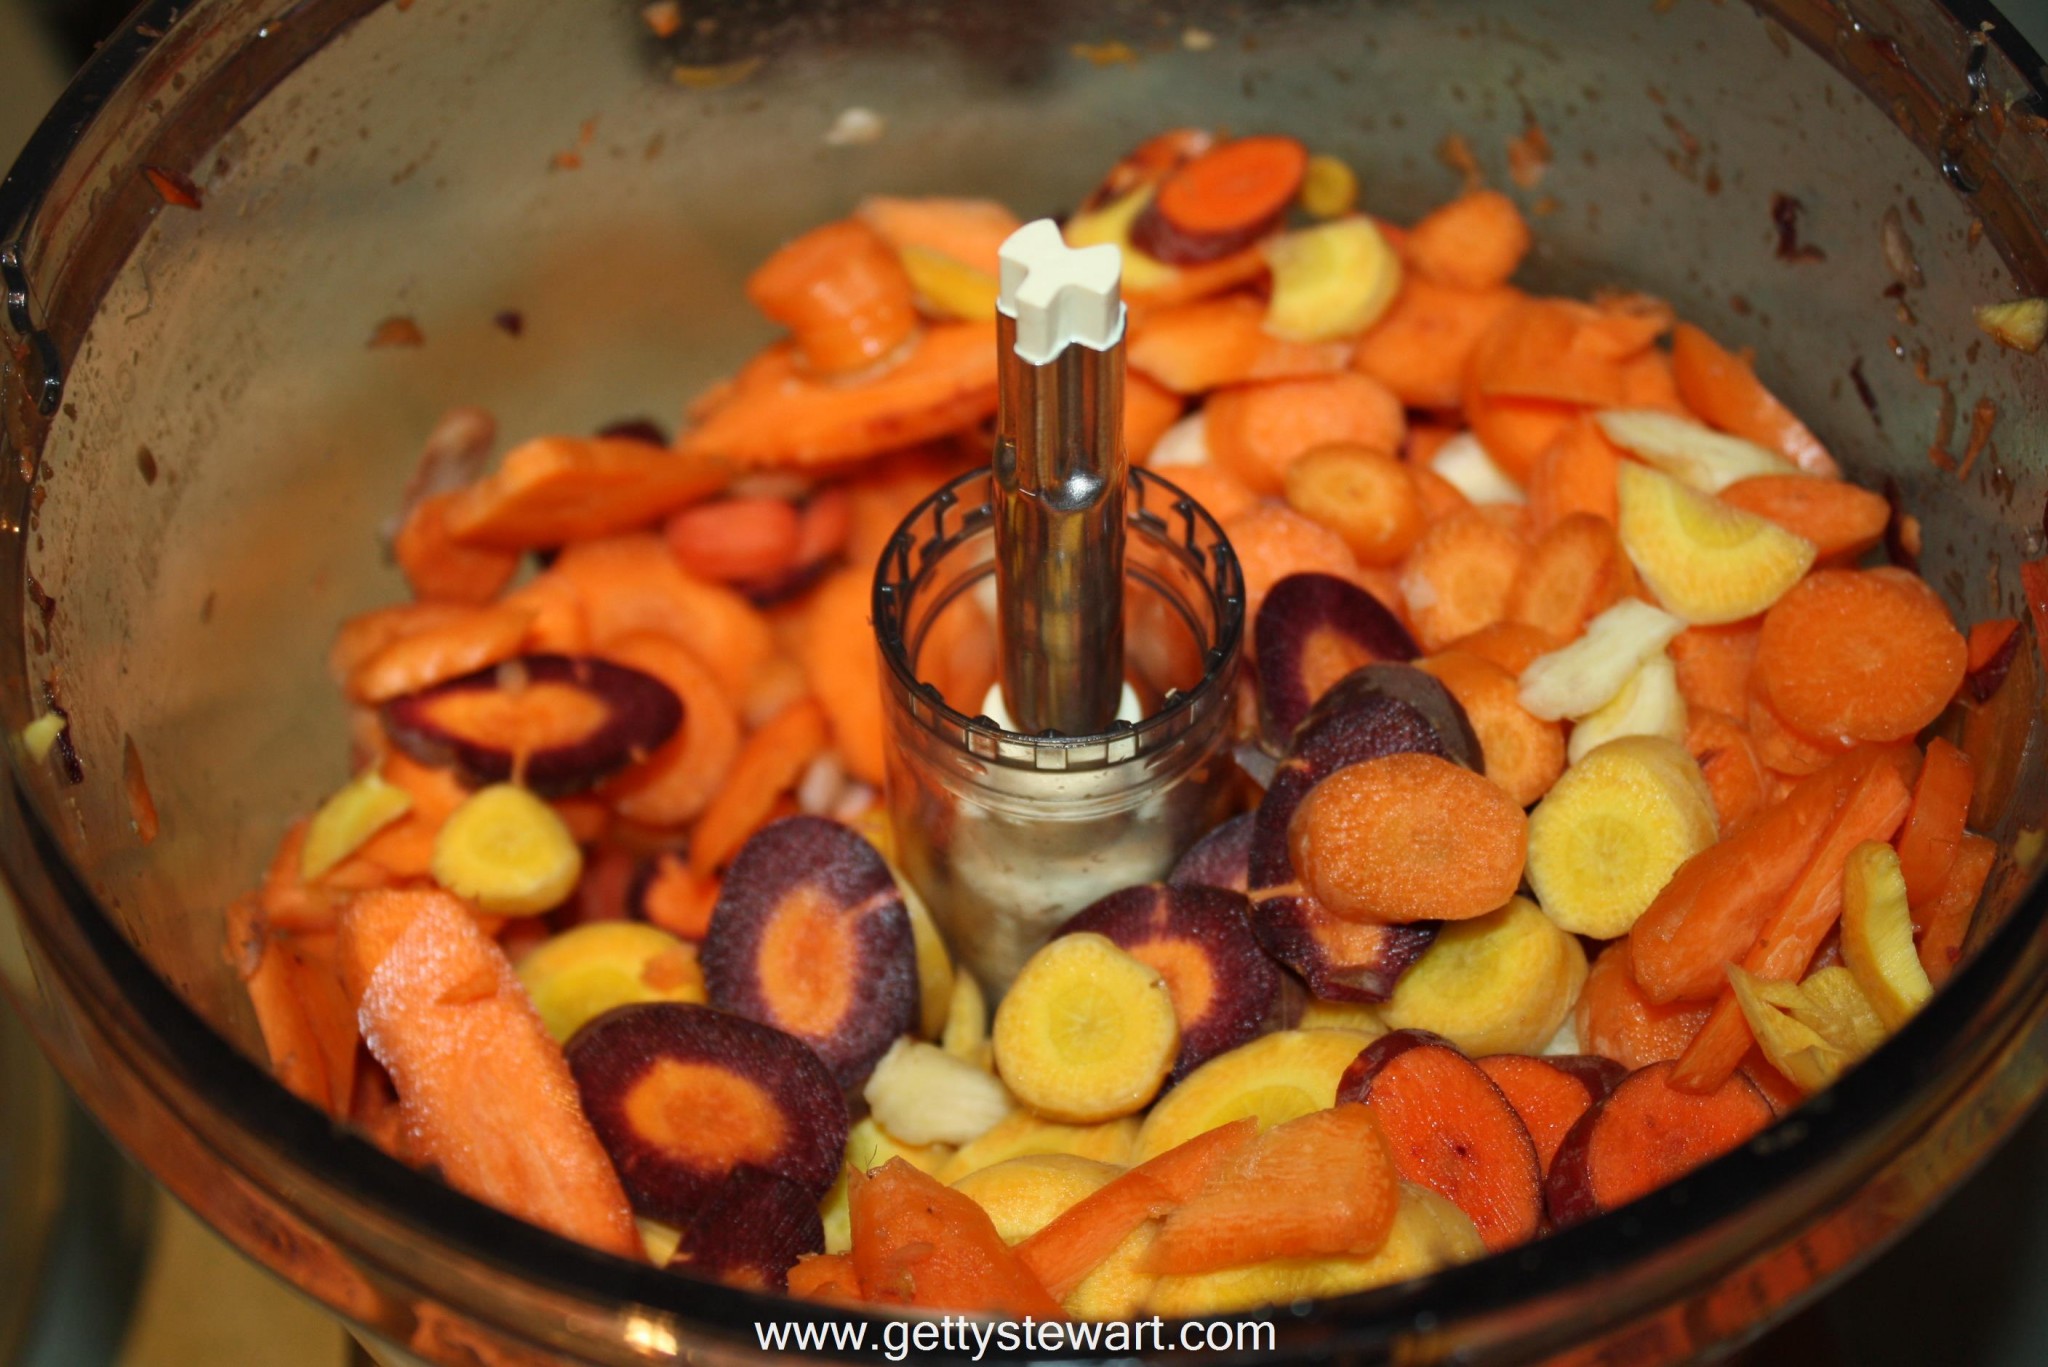 Cut carrots to your preferred size. Sliced in rounds or in quarters ...